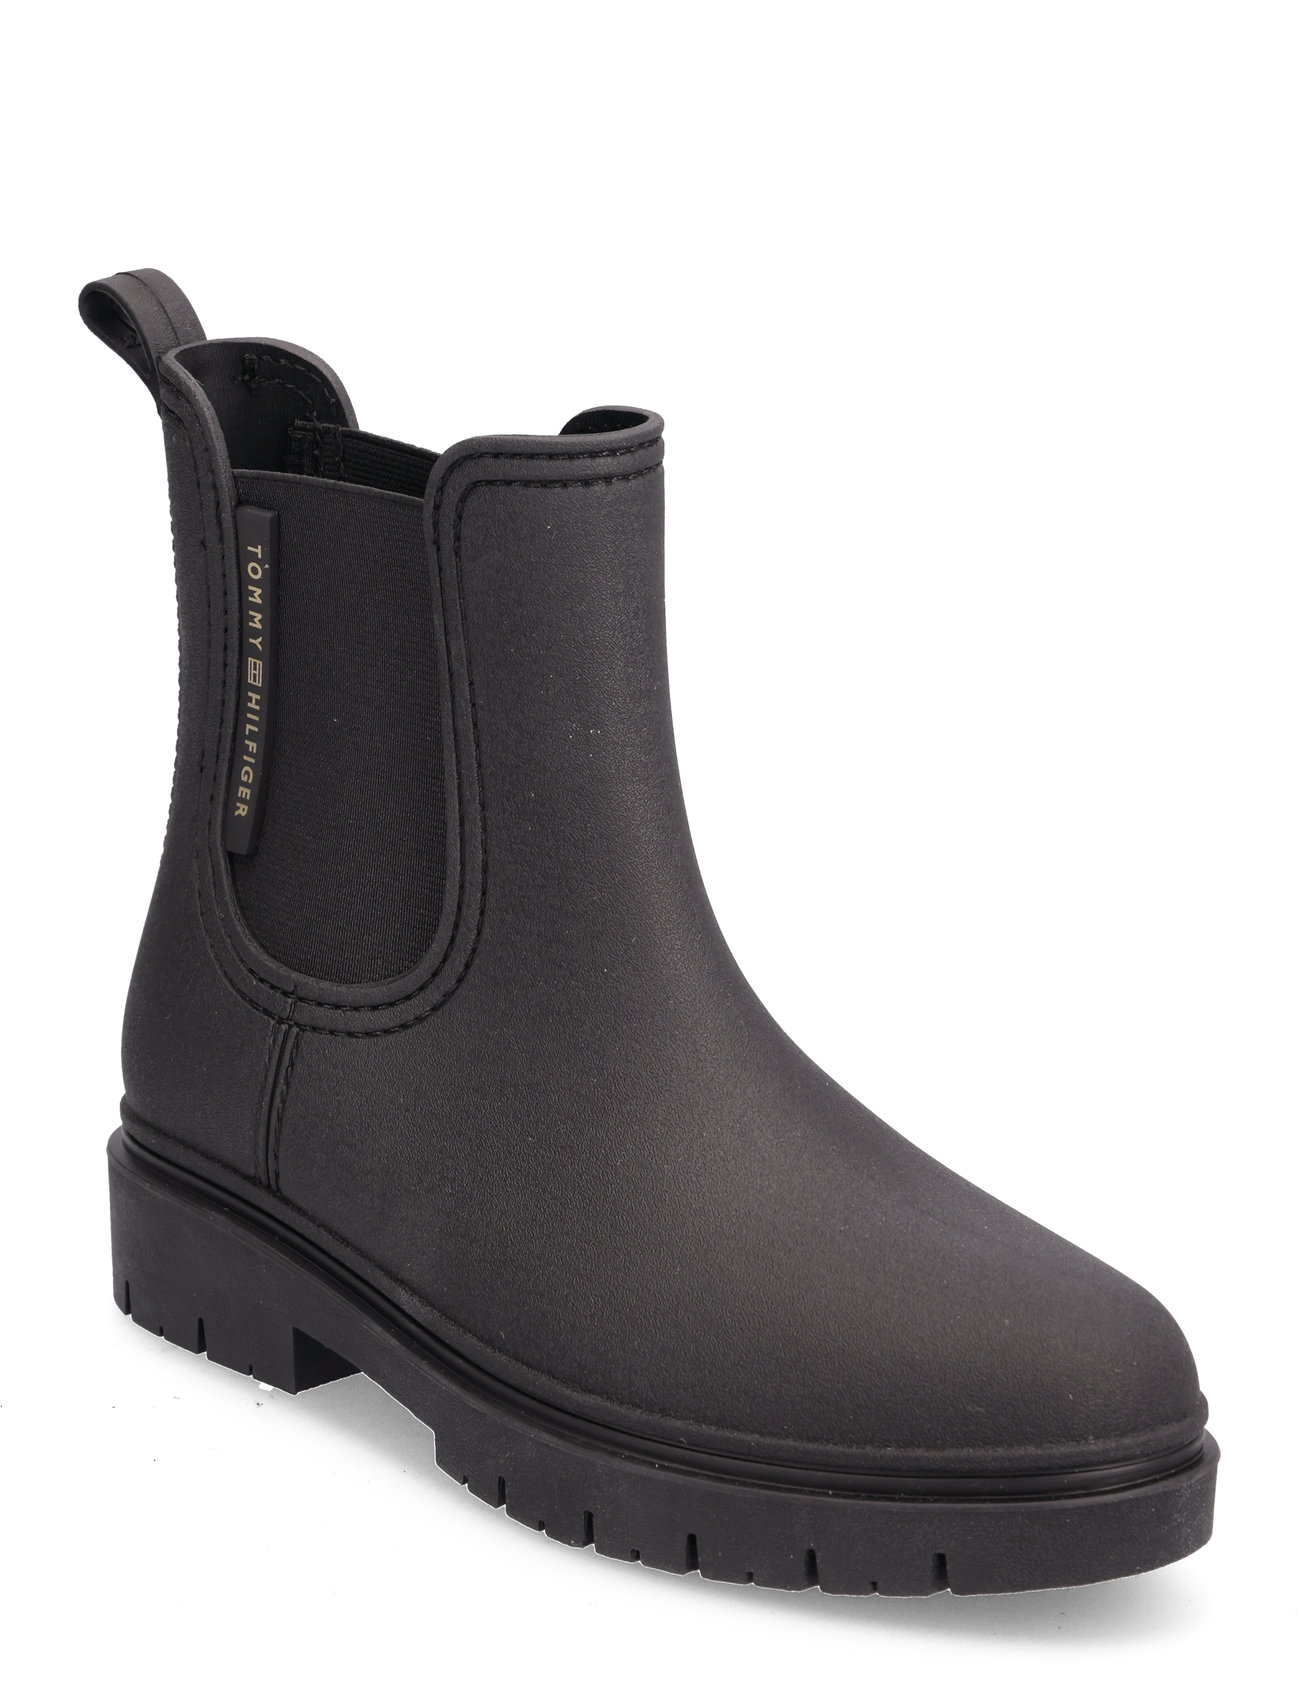 Essential Tommy Rainbootie Shoes Boots Ankle Boots Ankle Boots Flat Heel Black Tommy Hilfiger